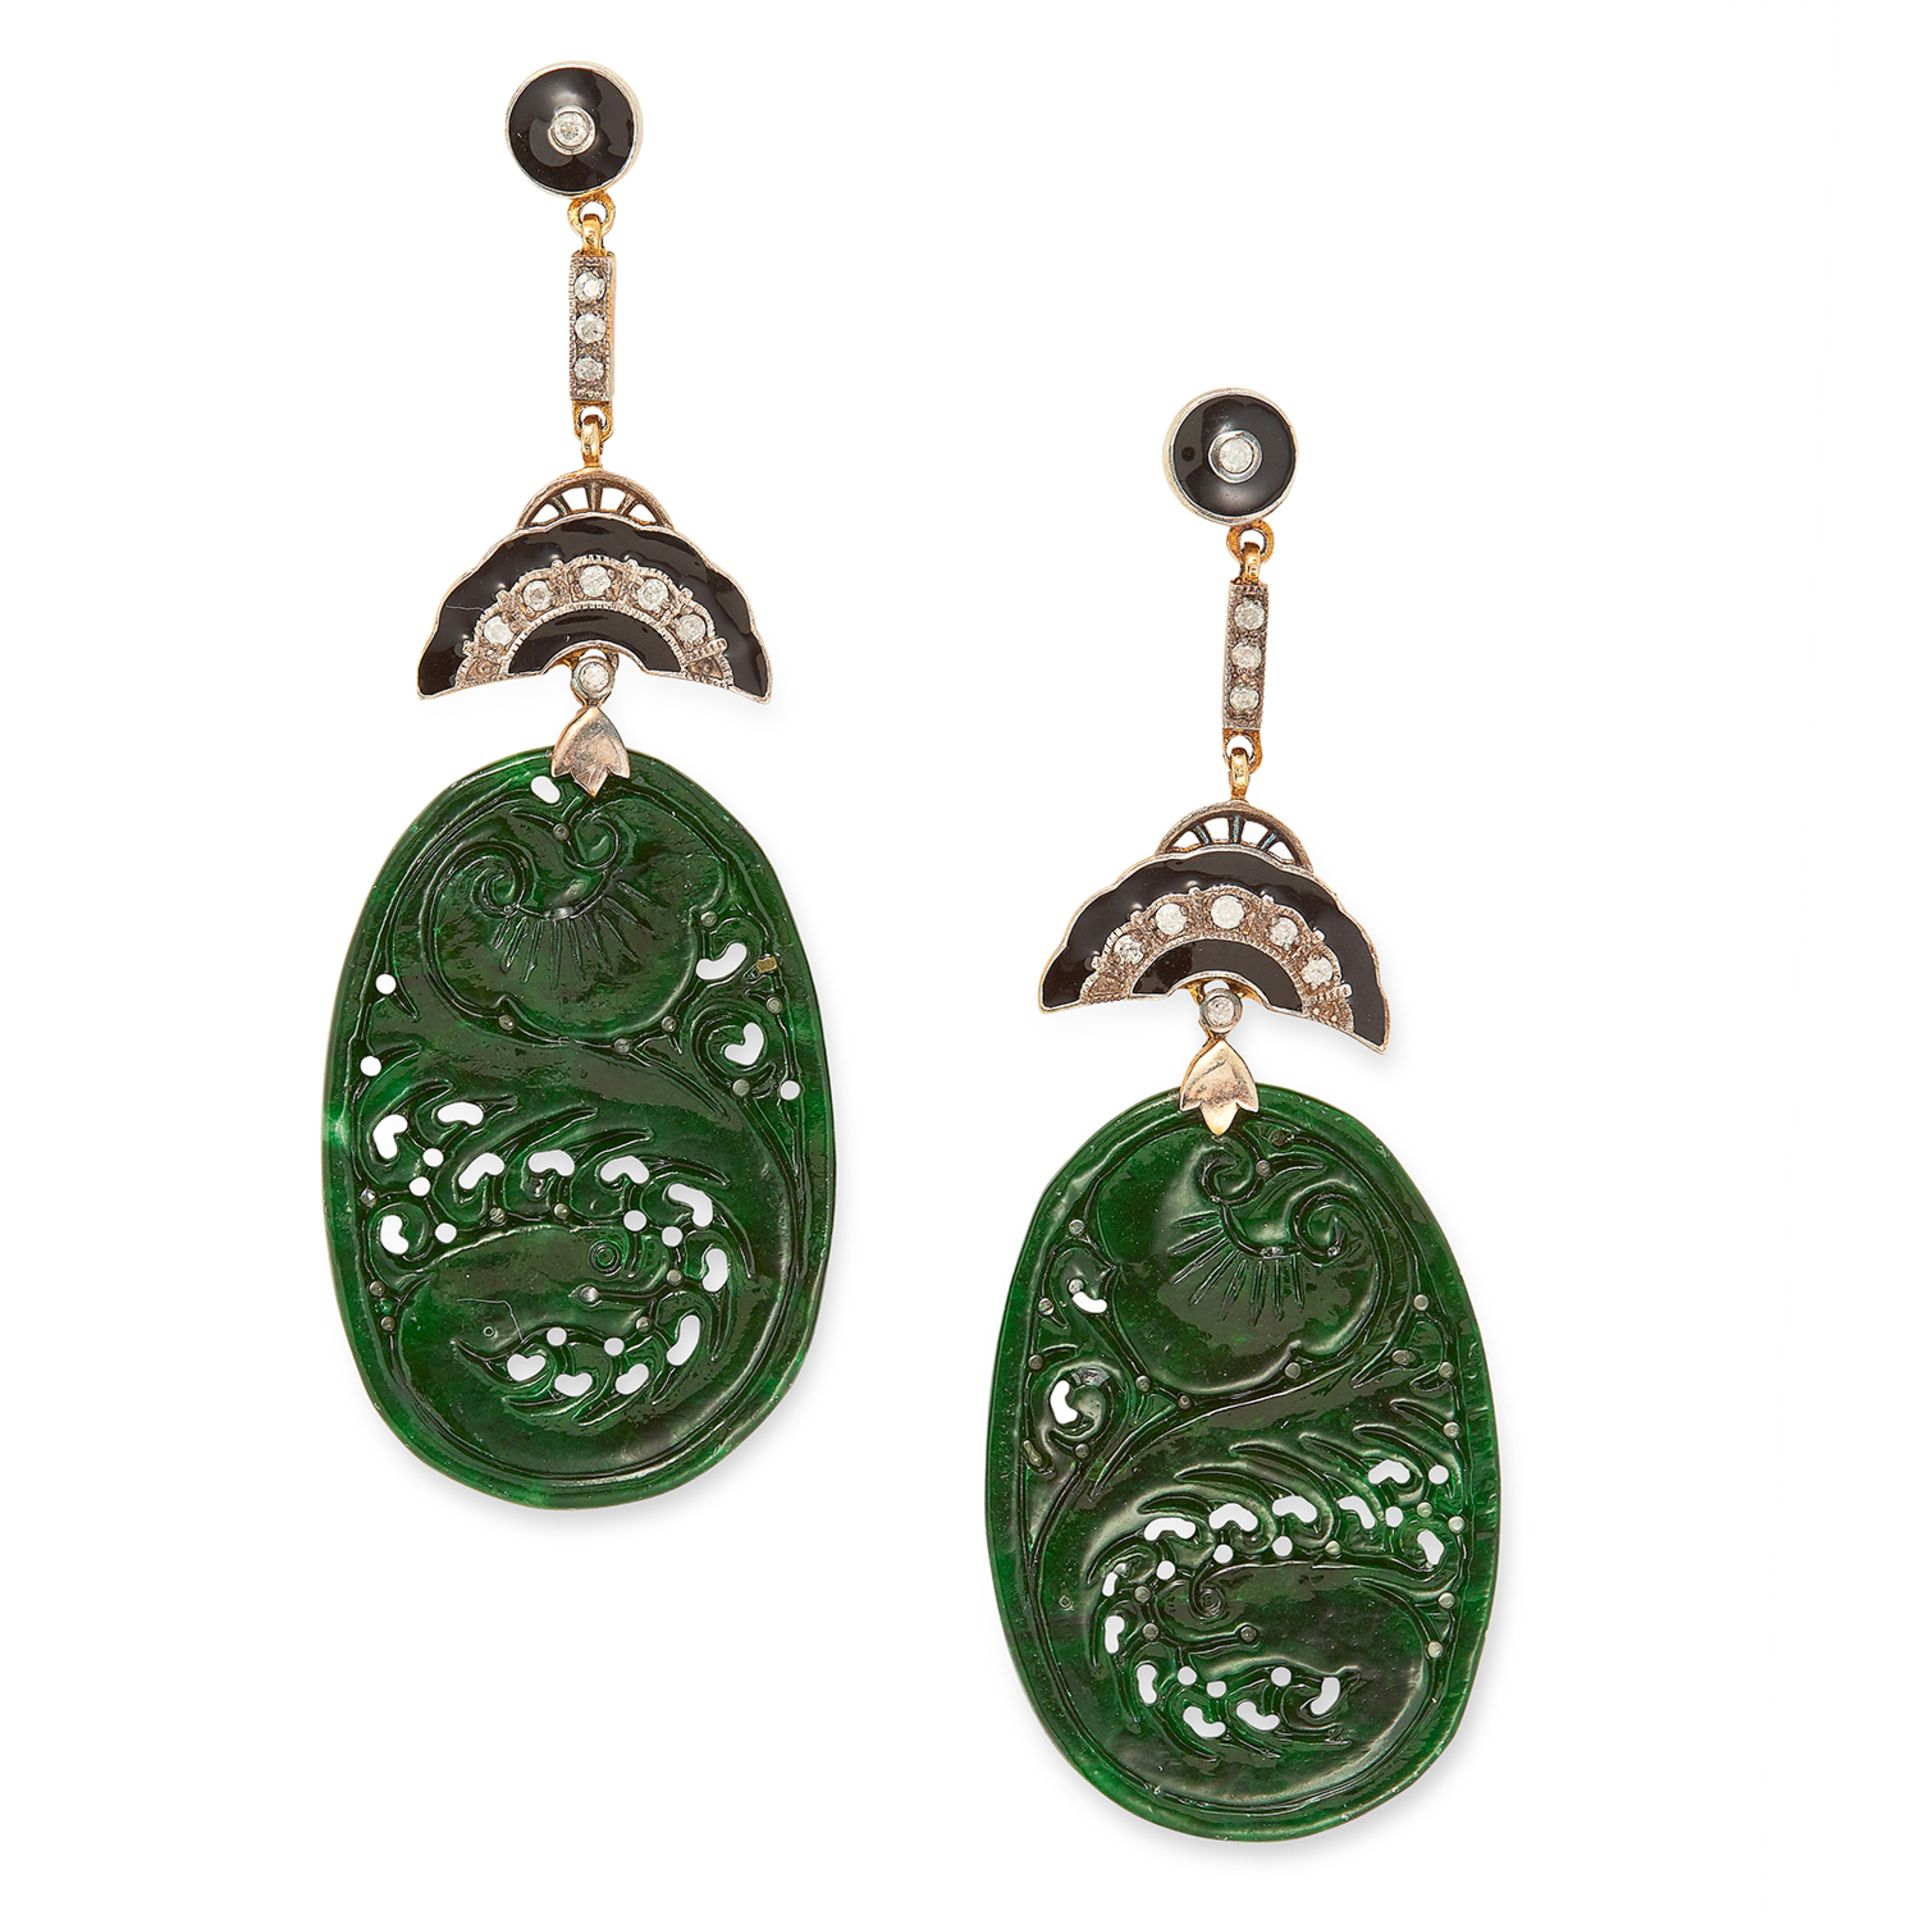 A PAIR OF JADE, ONYX AND DIAMOND EARRINGS in Art Deco design set with carved jade plaques, round cut